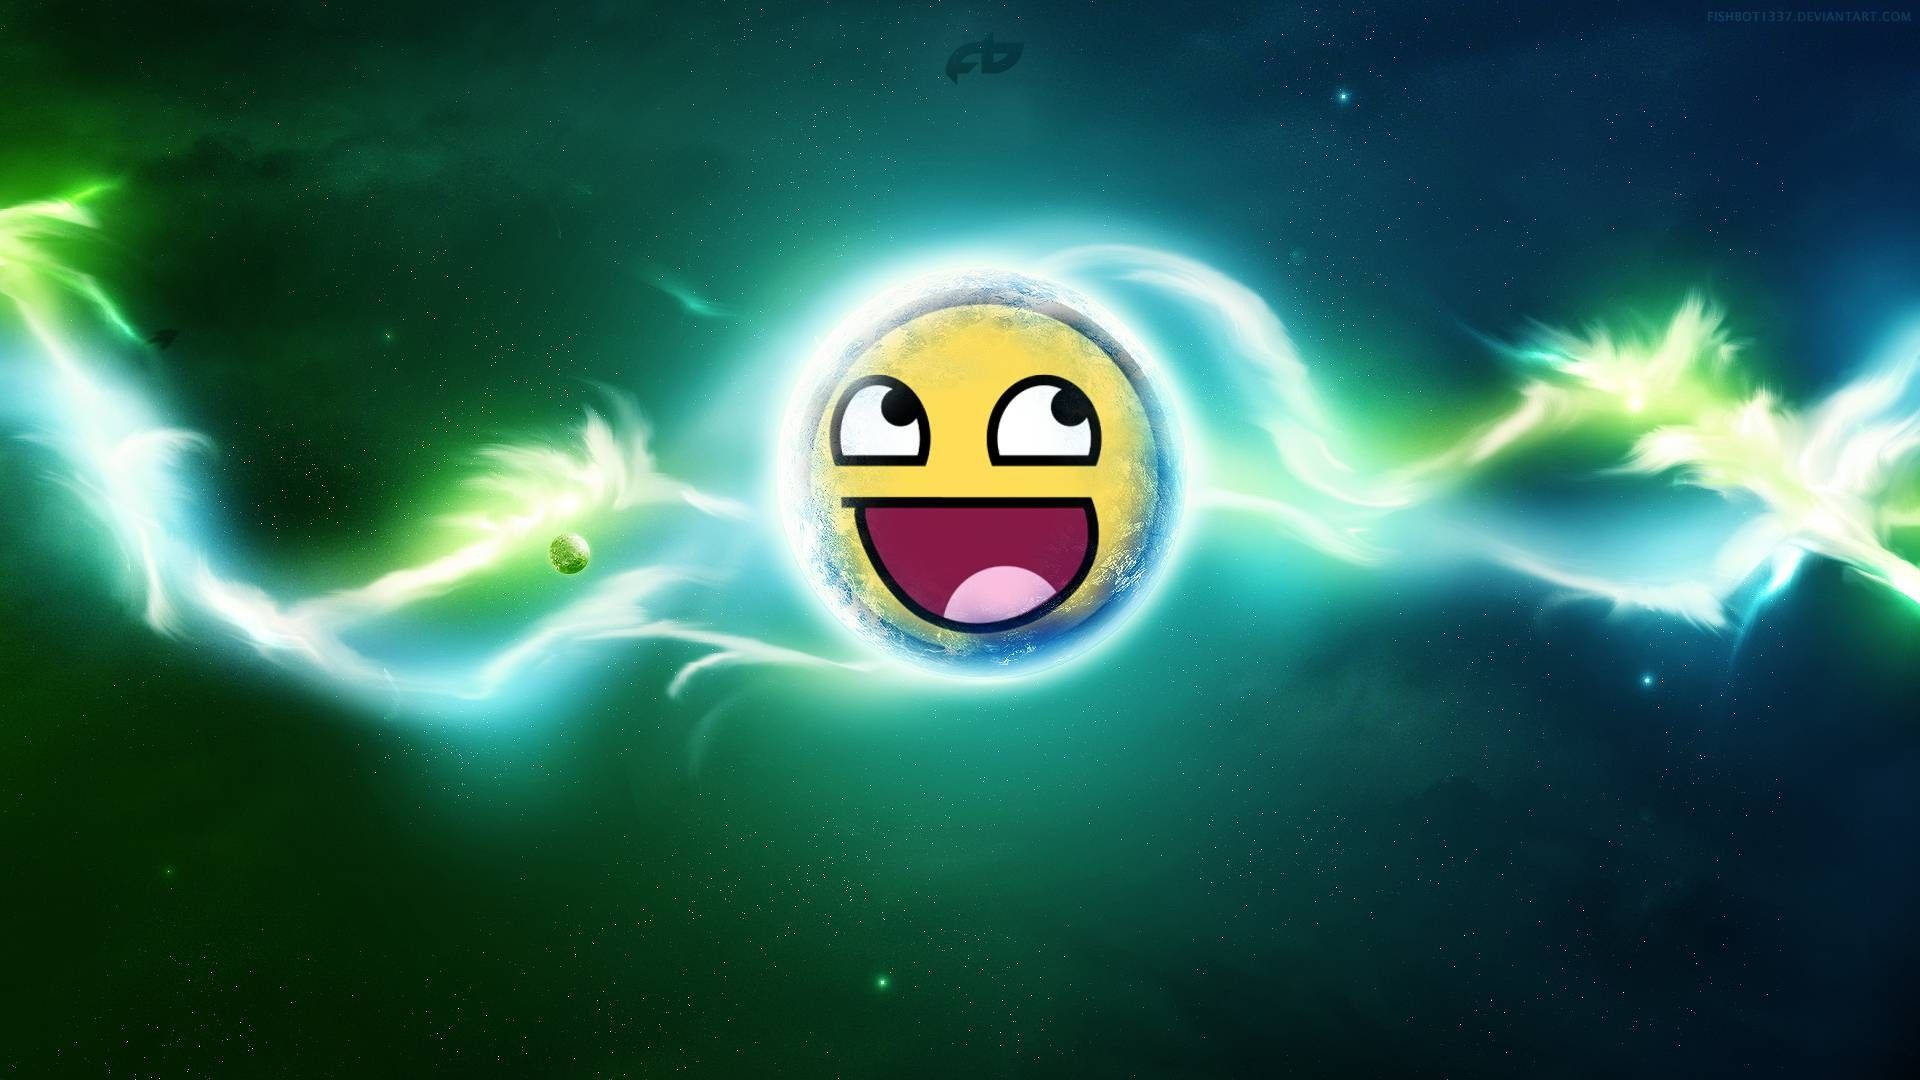 Smiley Face With Lightning Wallpaper